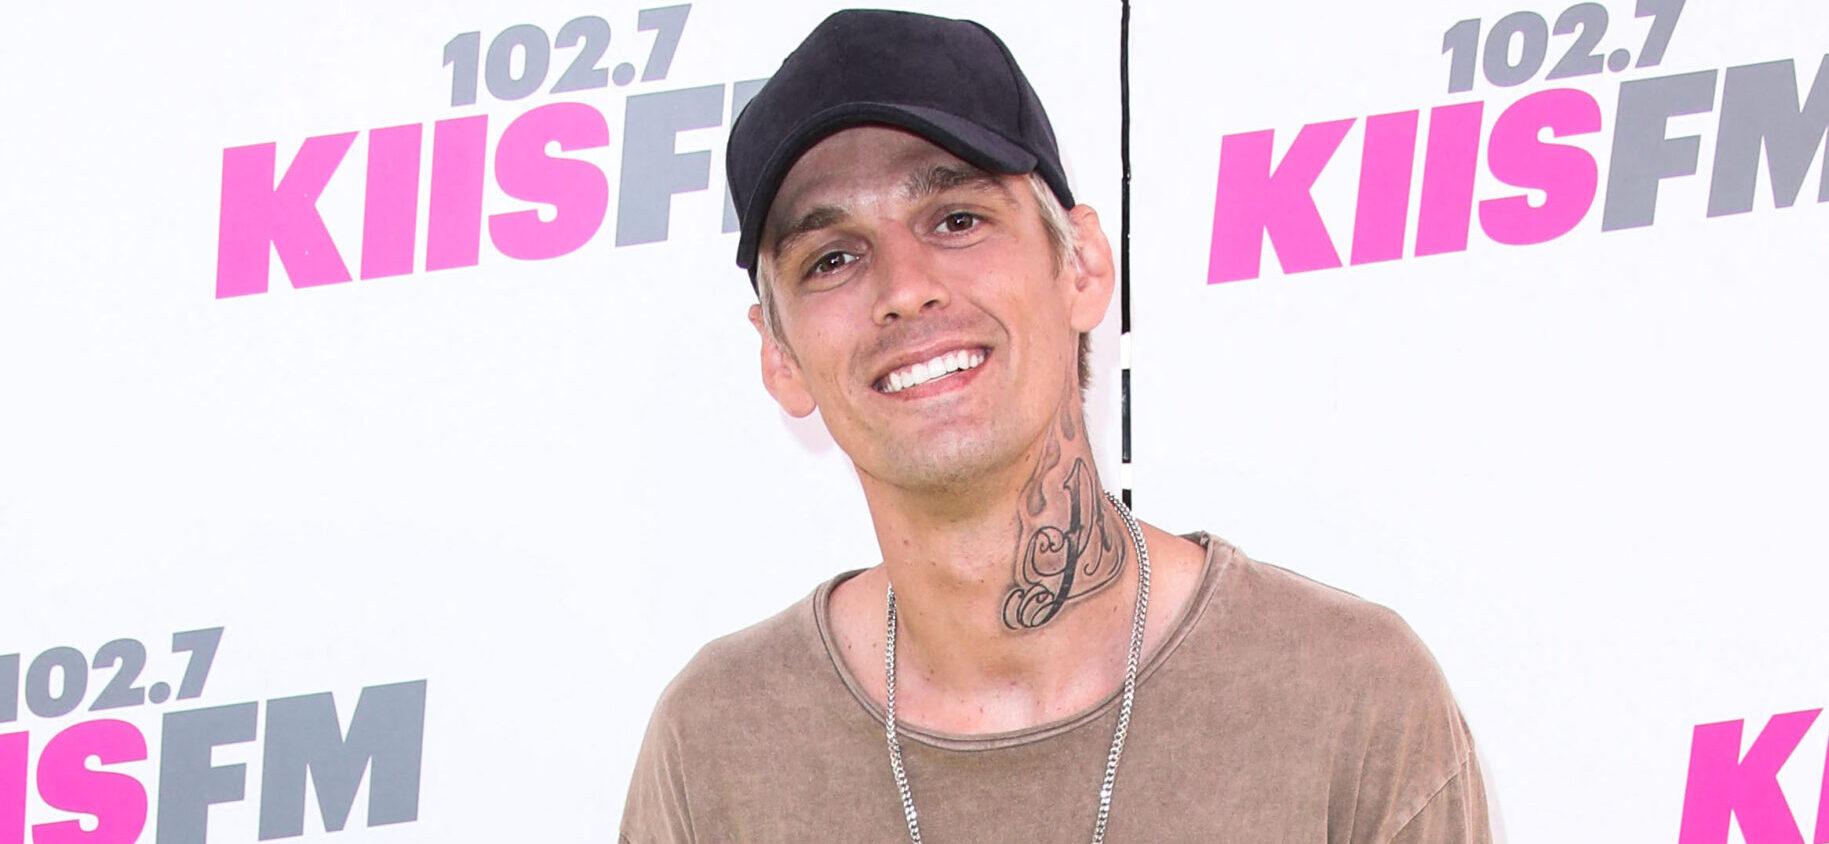 Aaron Carter Cause of Death Released: Drowning After Huffing Aerosol Dusters